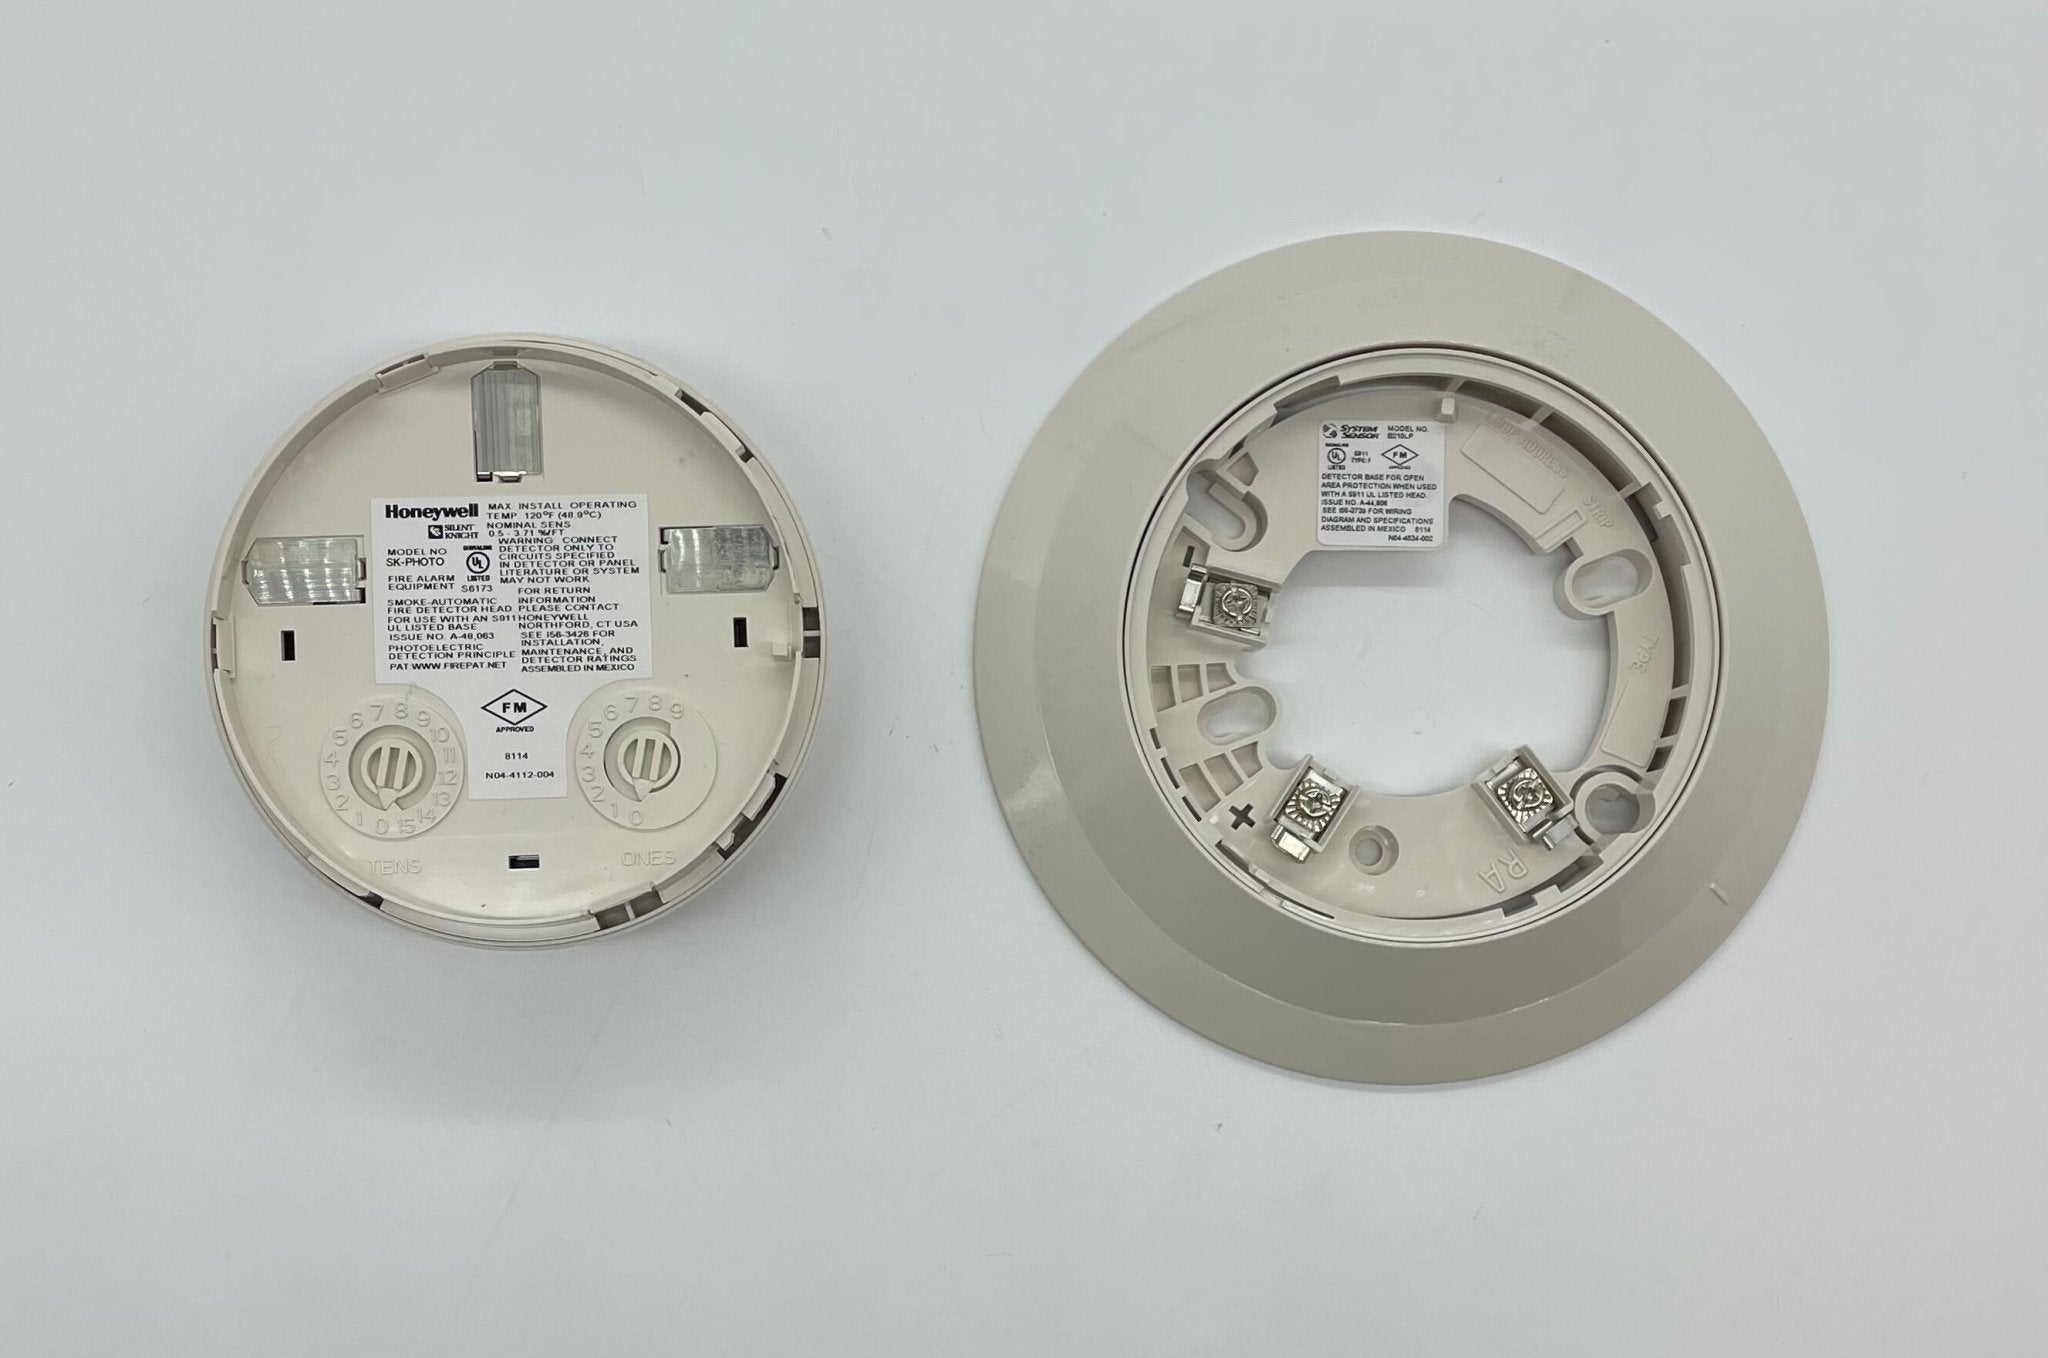 Silent Knight SK-PHOTO - The Fire Alarm Supplier